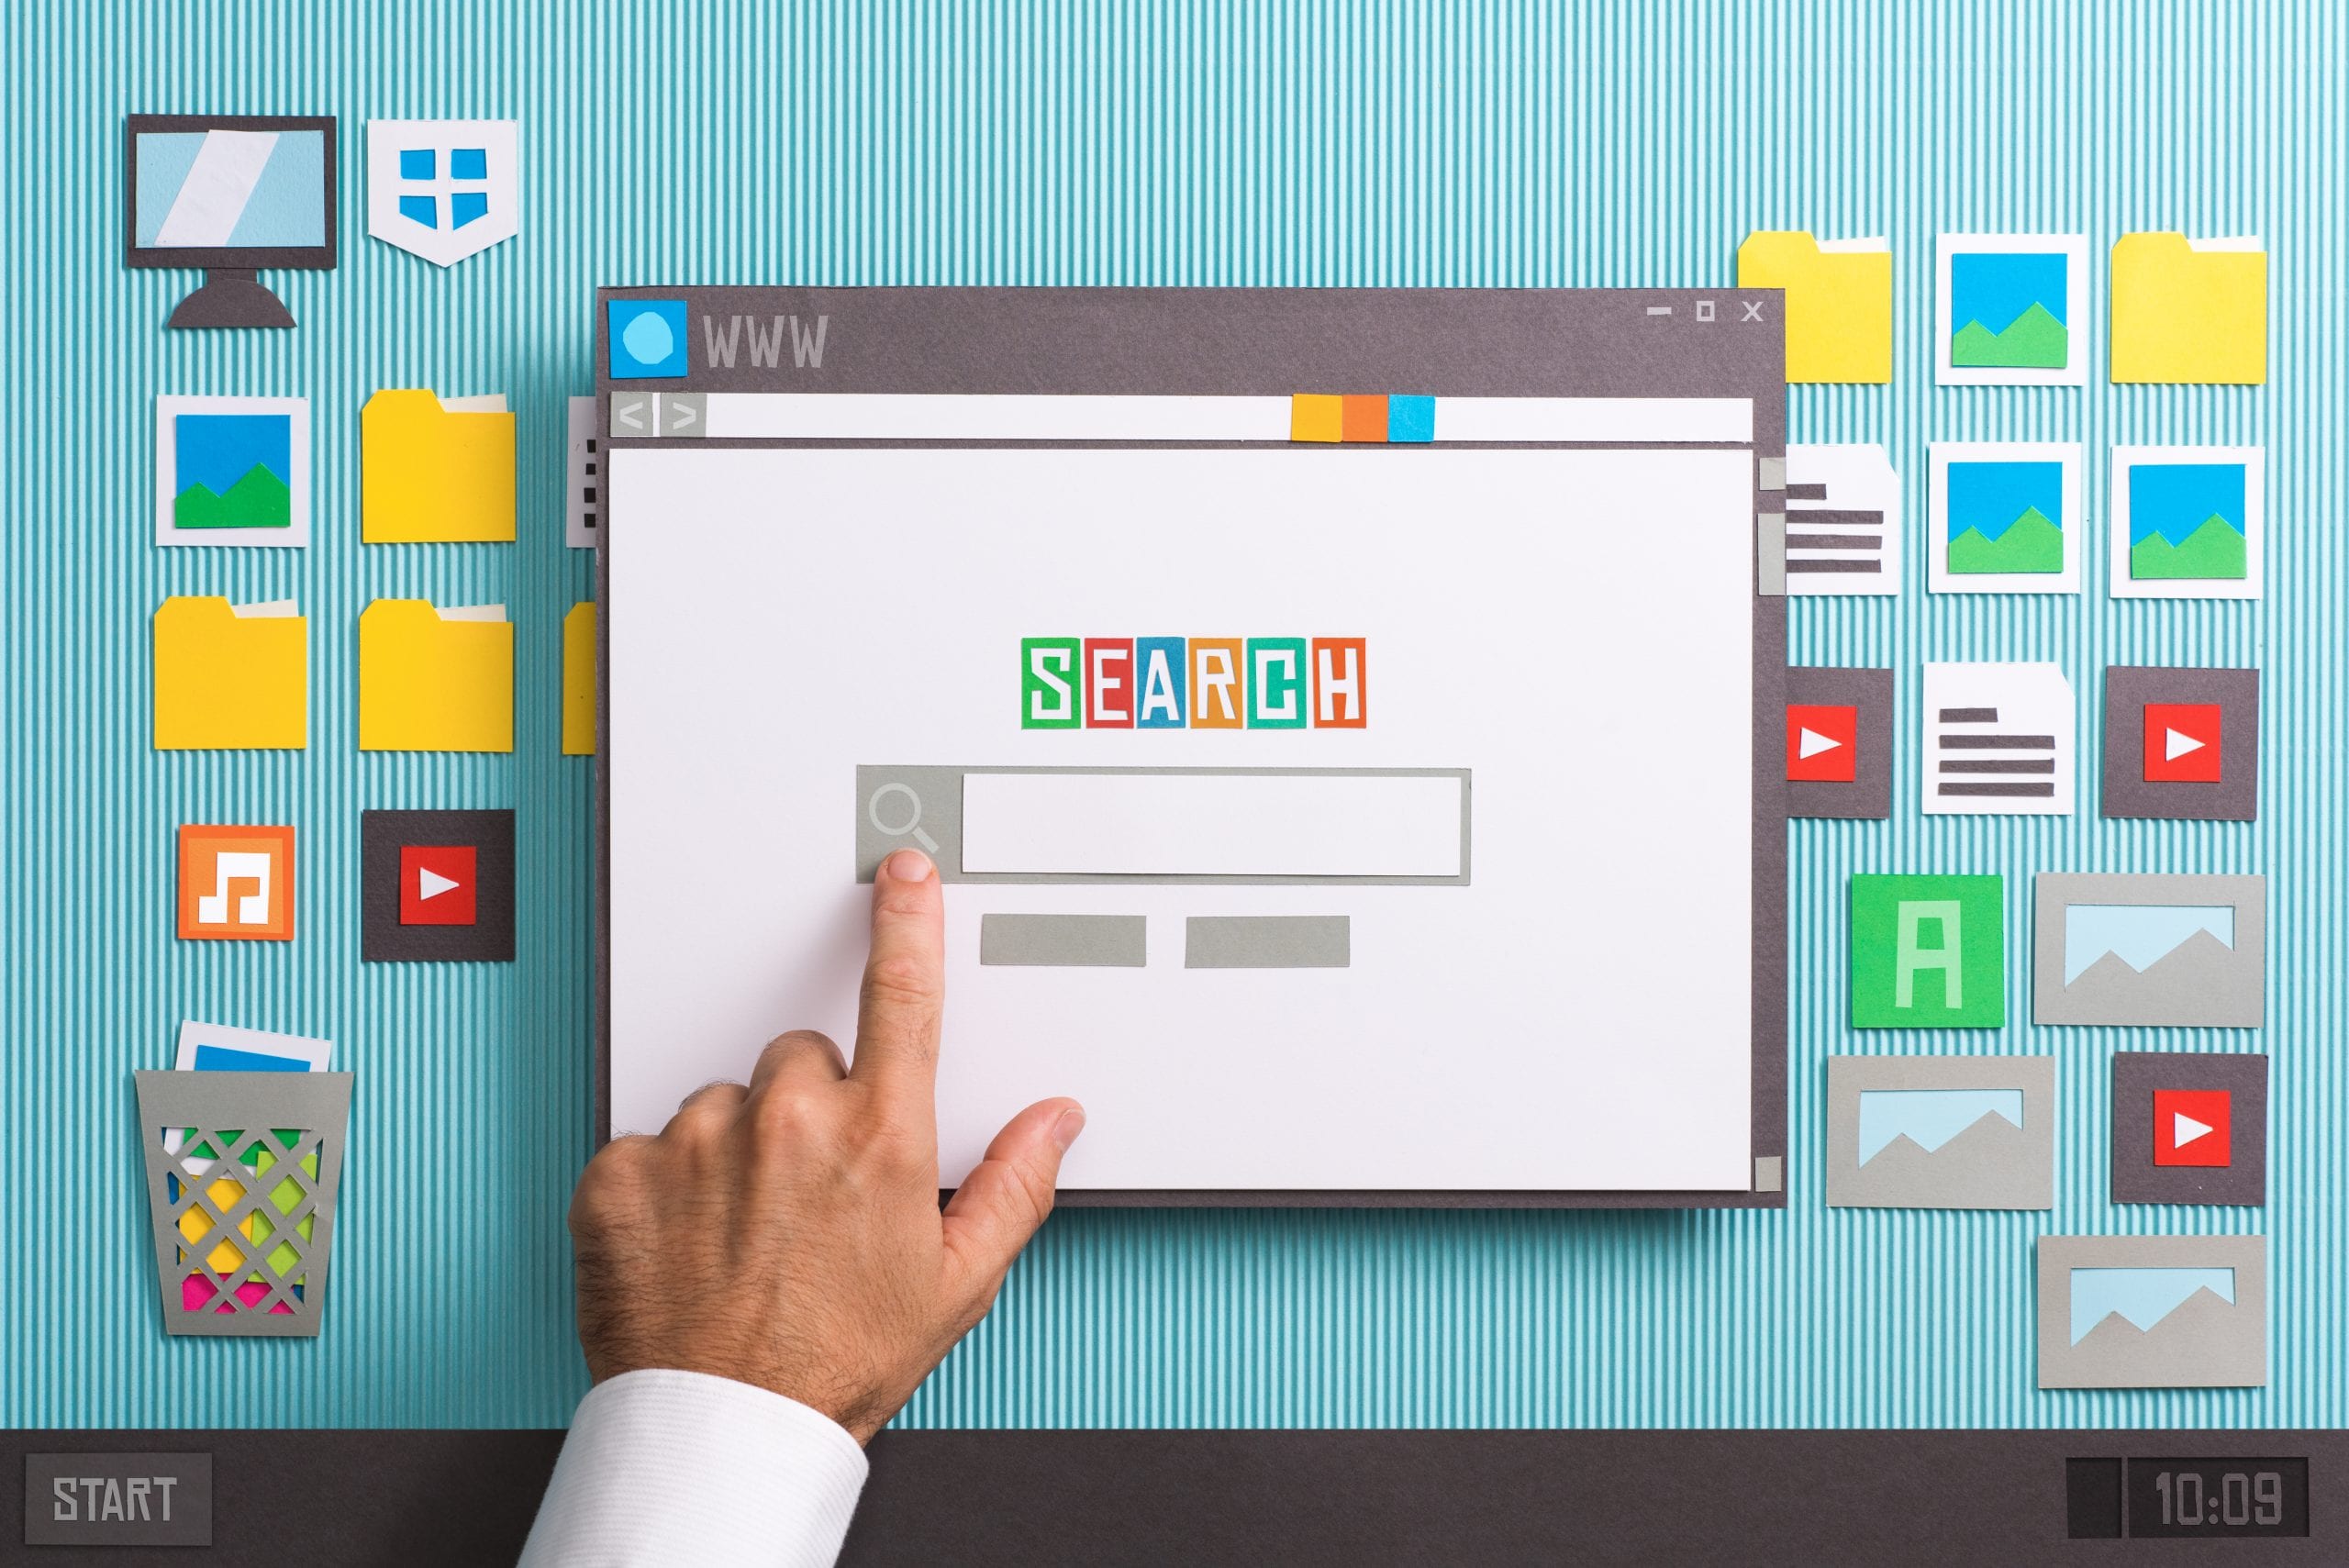 Search Engine Keywords Selection